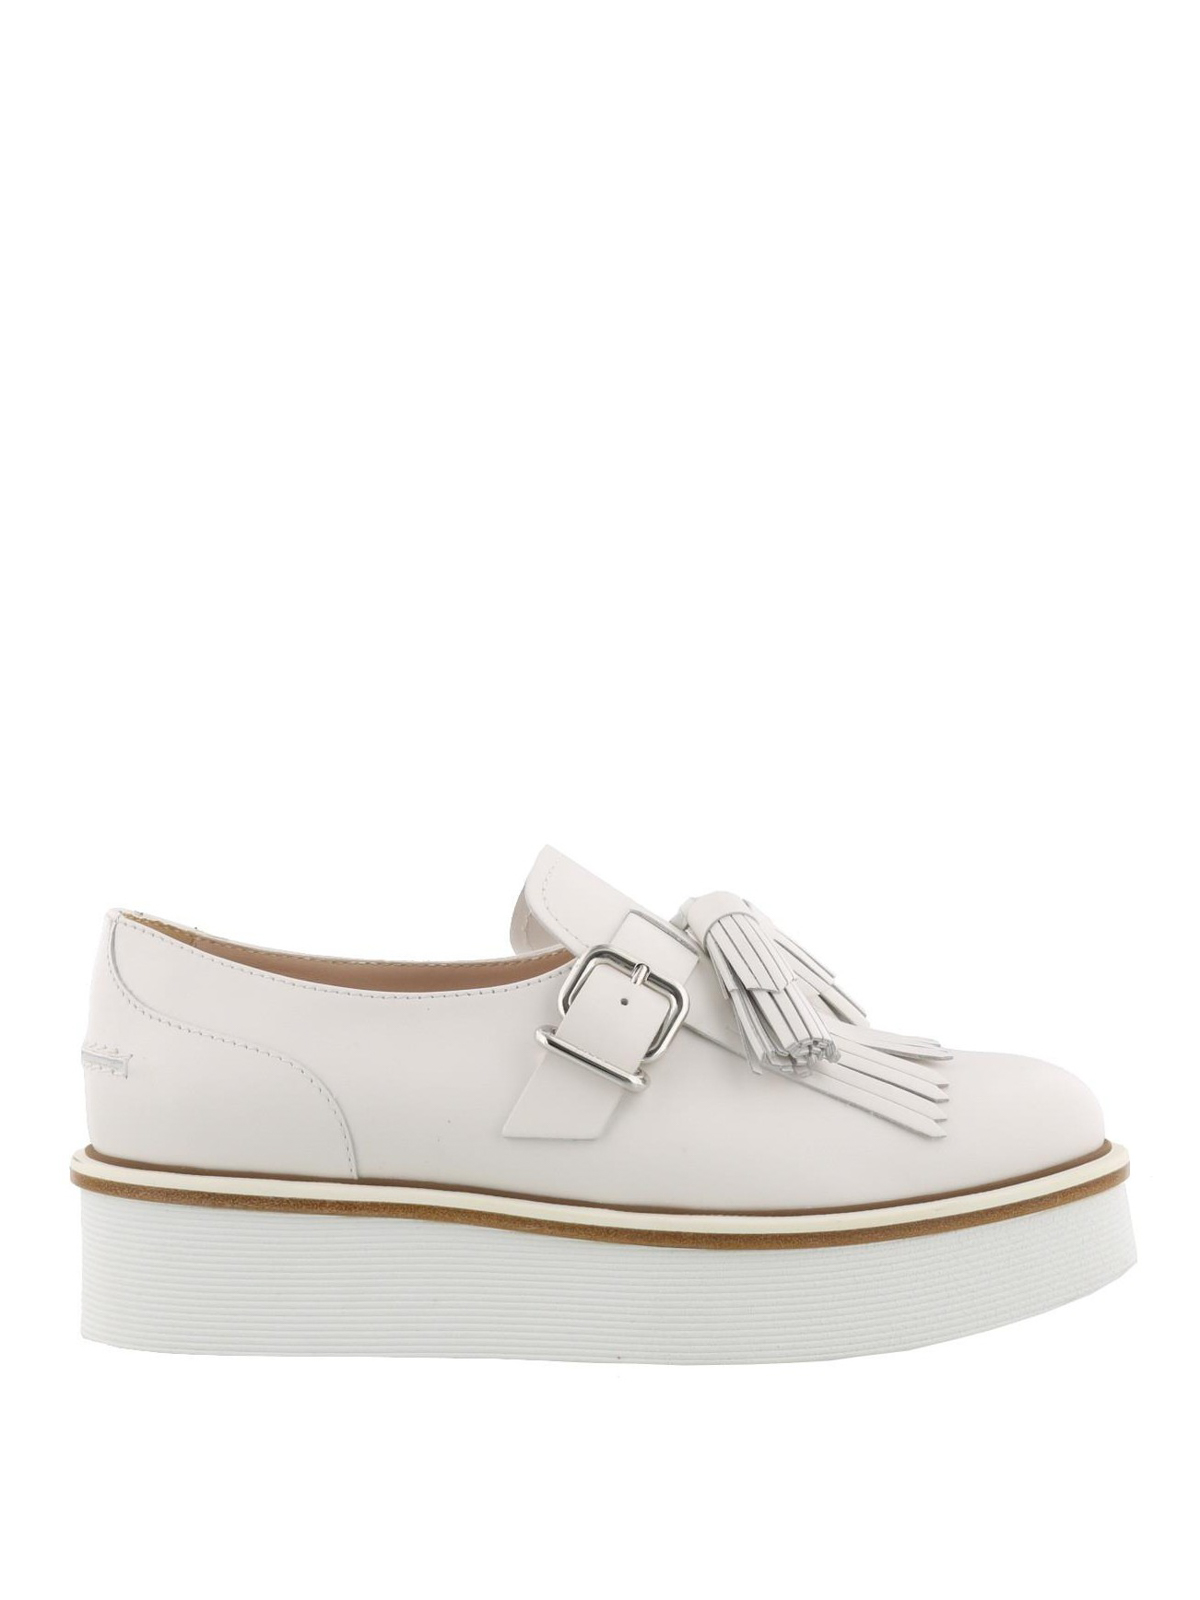 Celsius Bevidst passe Loafers & Slippers Tod'S - White fringed platform loafers -  XXW65A0W570GOCB001